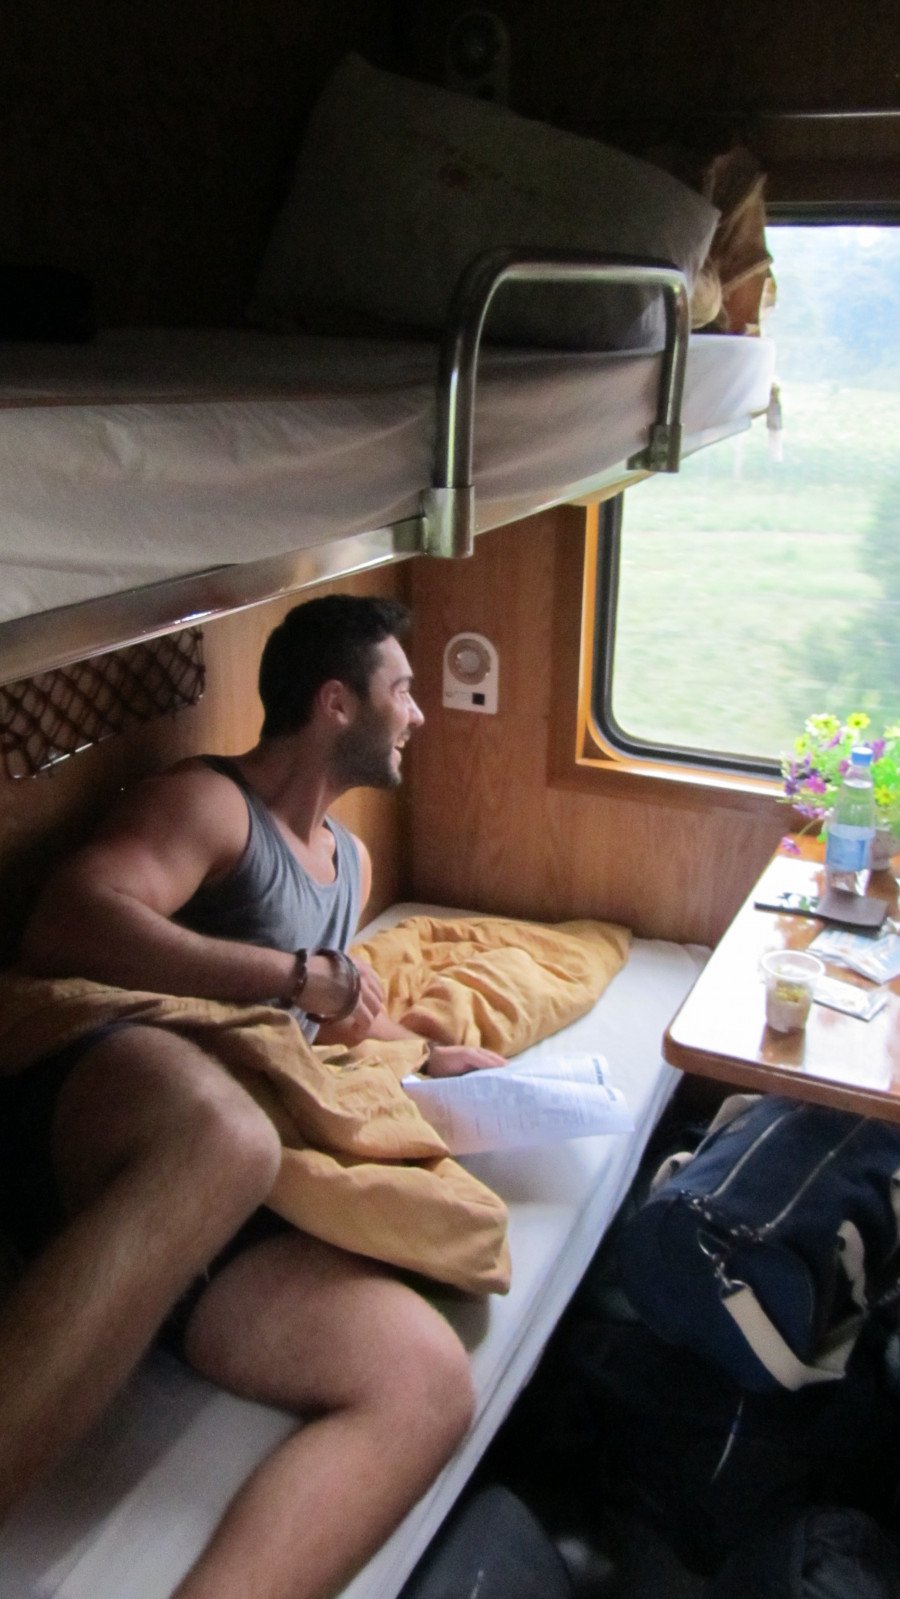 A man on a bed on a train